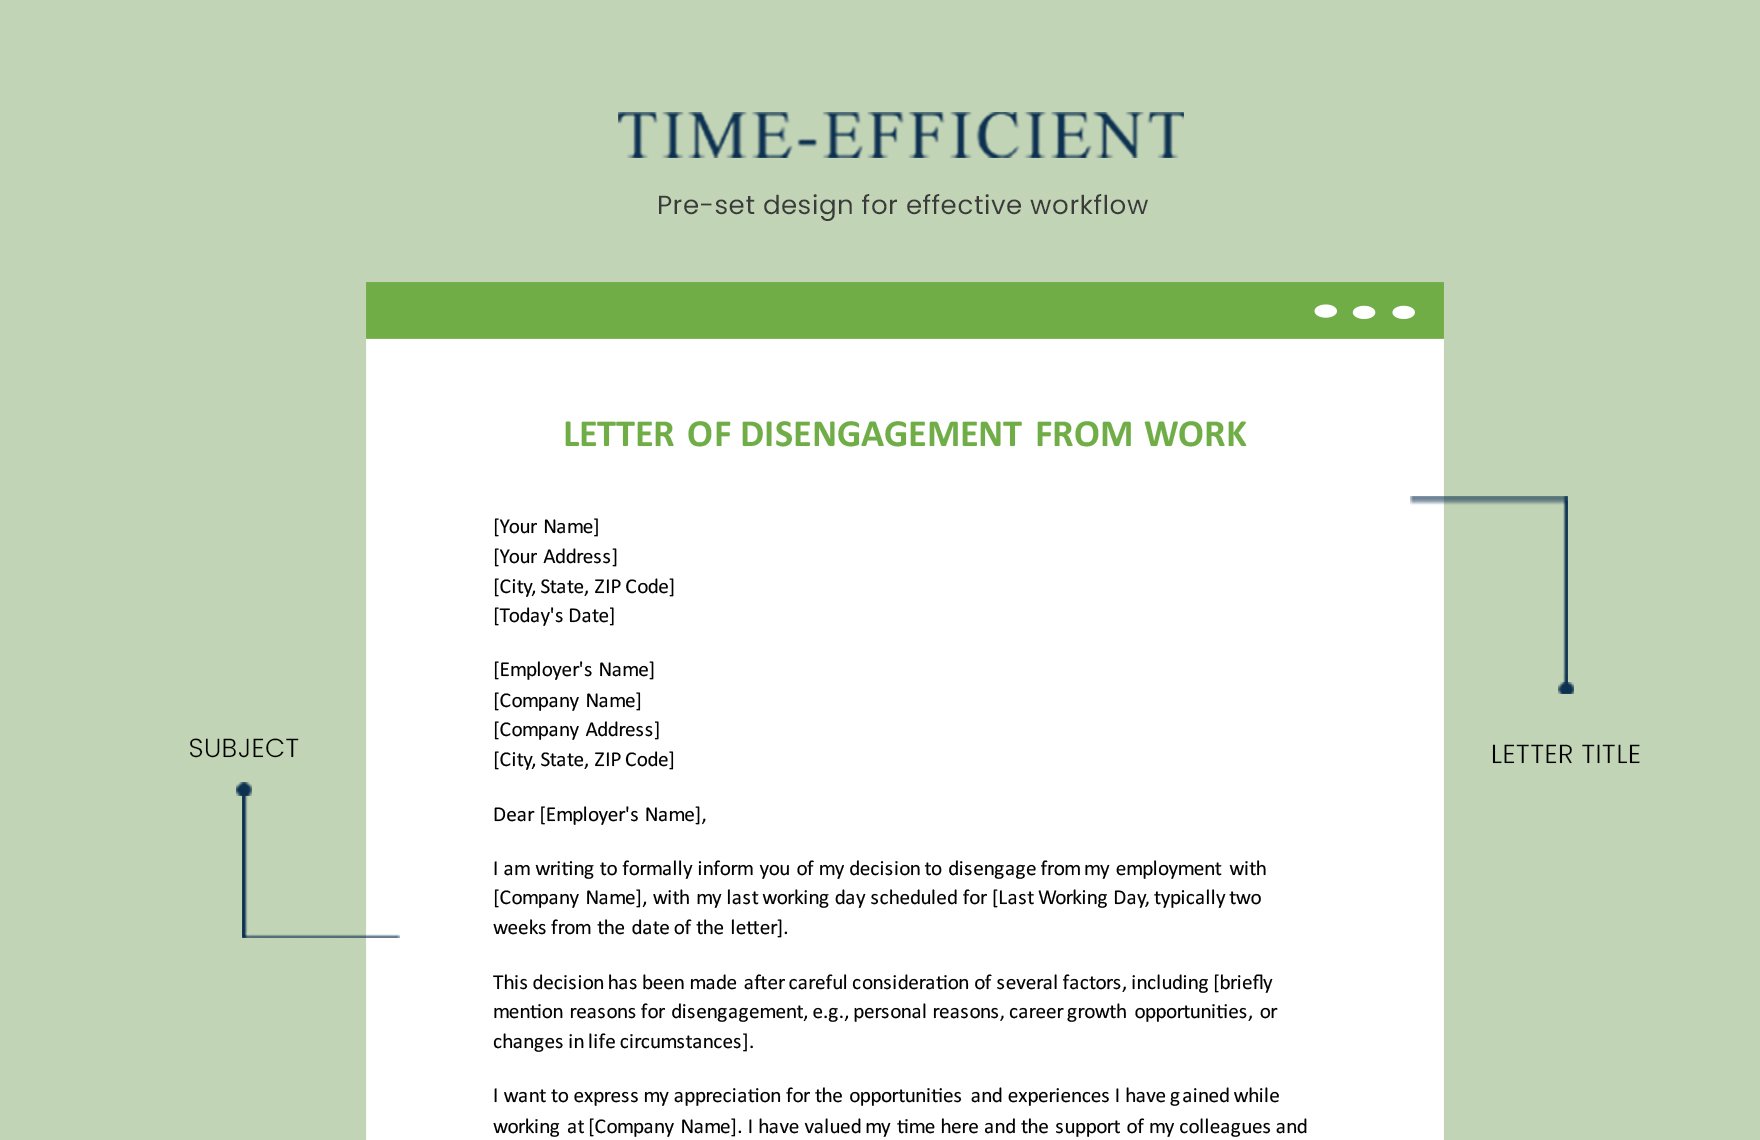 Letter Of Disengagement From Work